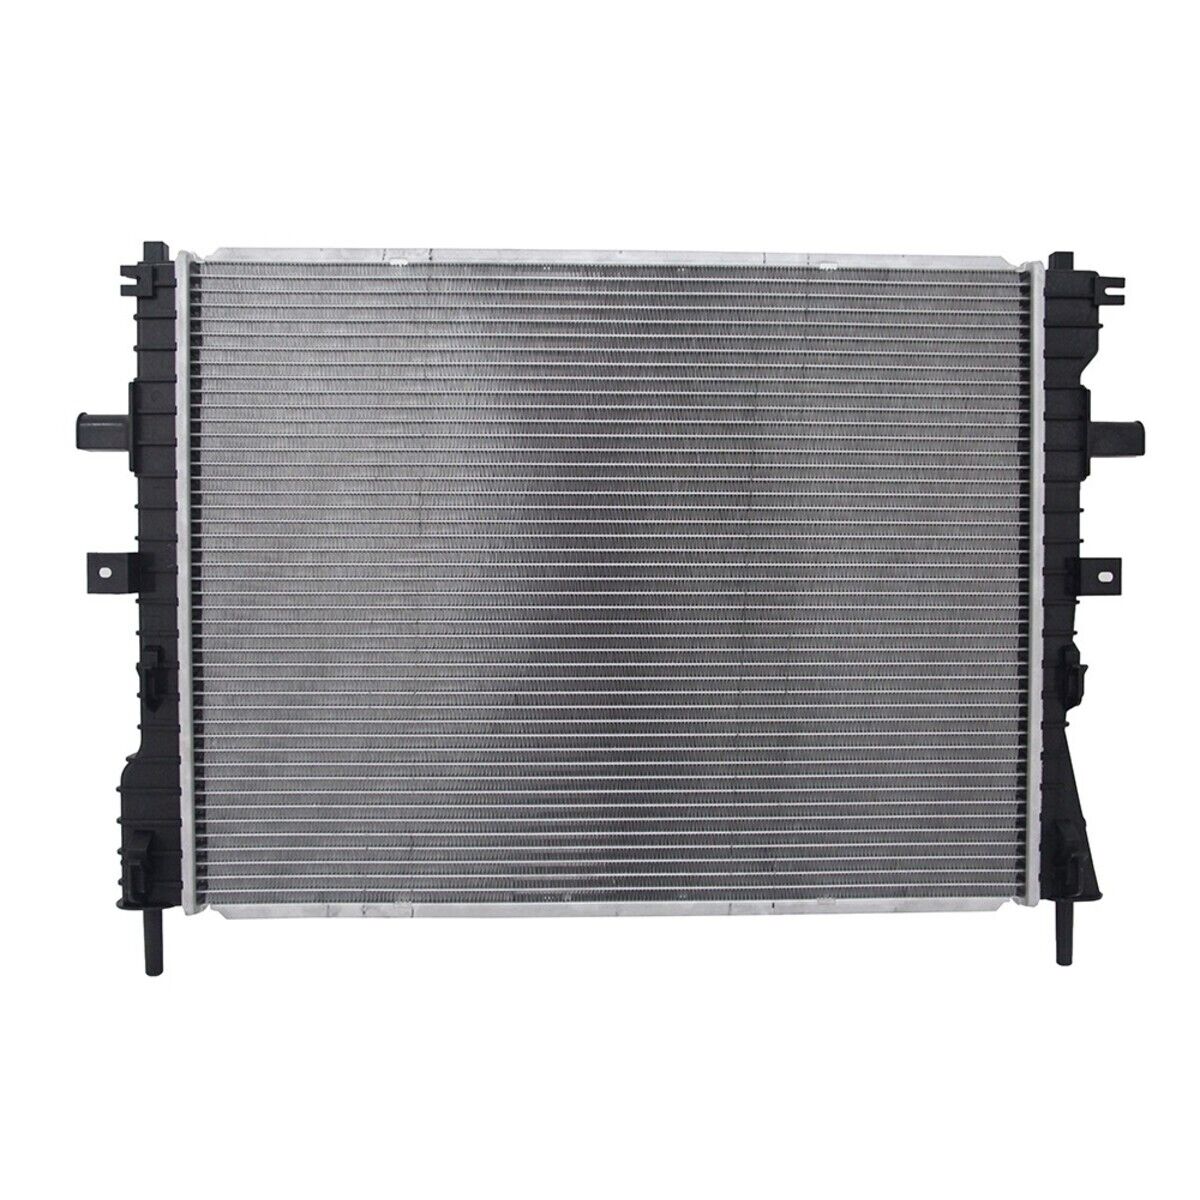 2610 One Stop Solutions Radiator for Mercury Grand Marquis Ford Crown Victoria